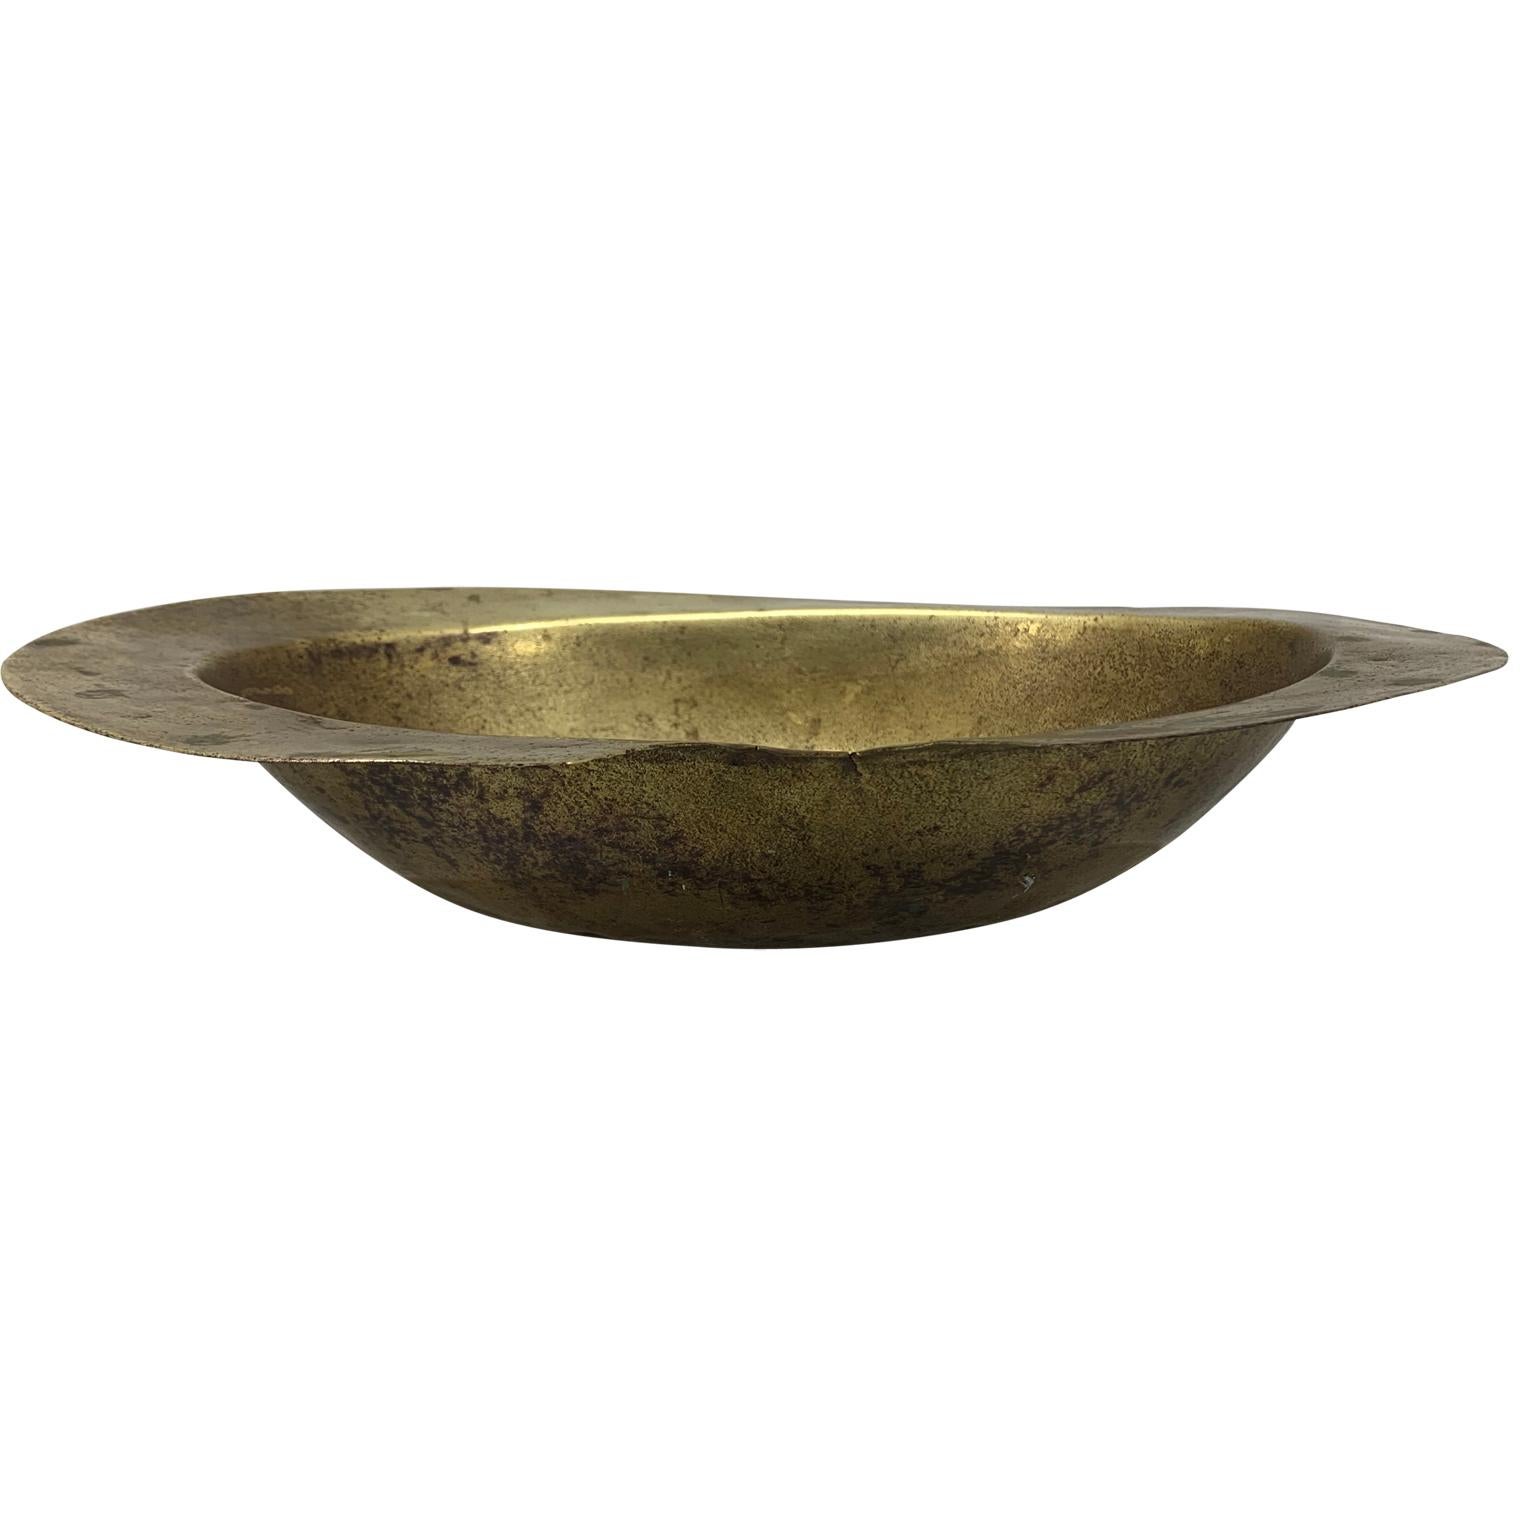 Early 19th European Brass Bowl In Good Condition For Sale In Haddonfield, NJ